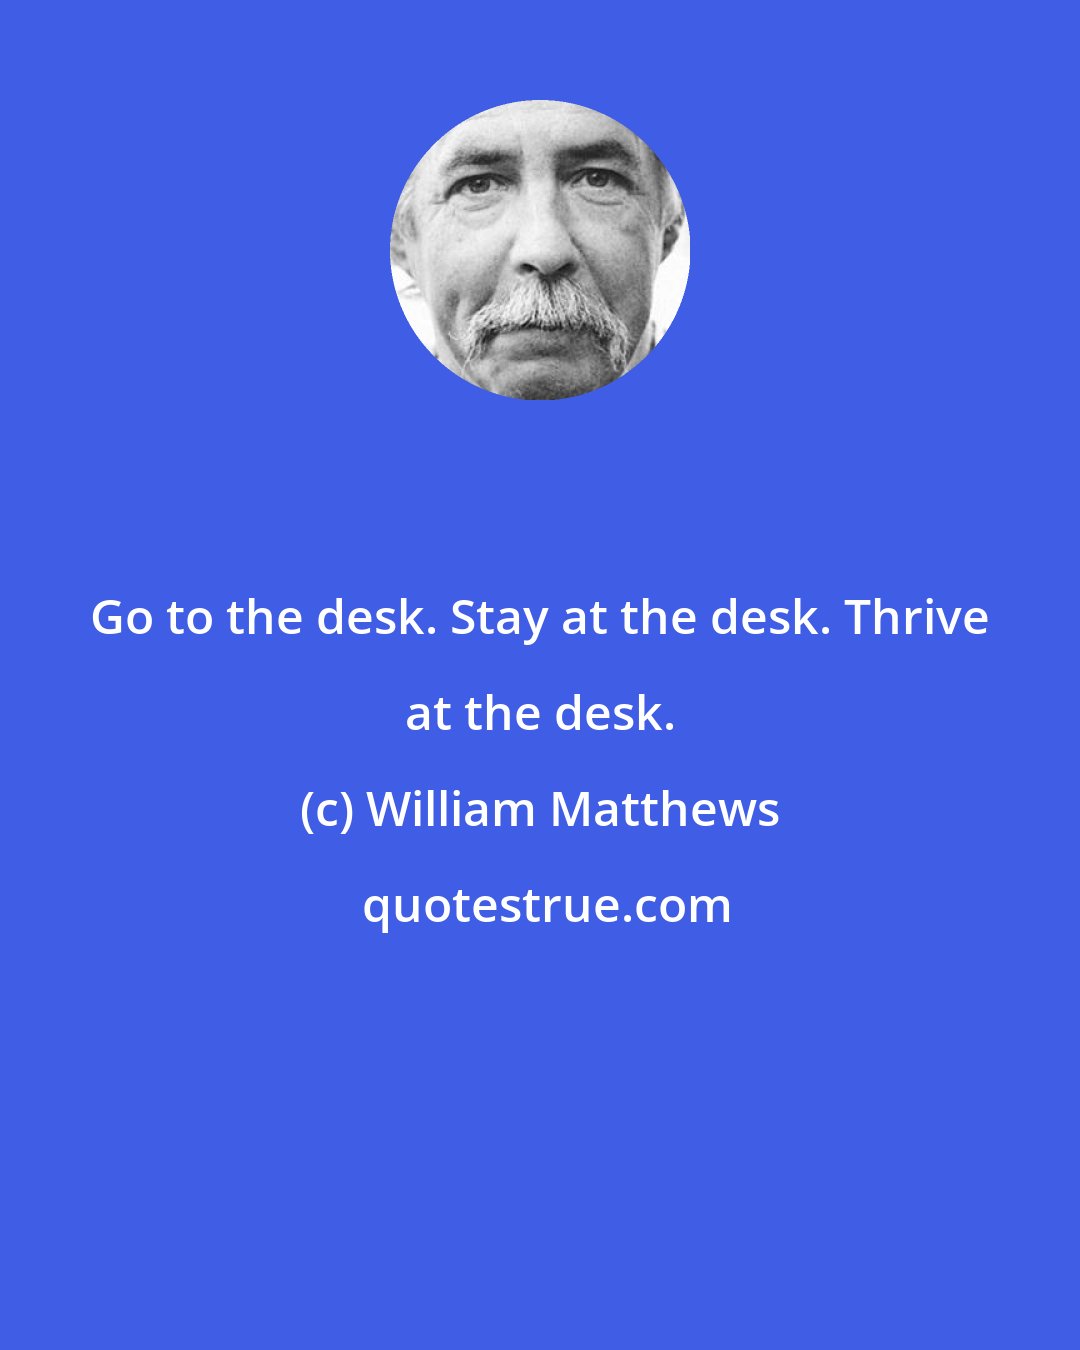 William Matthews: Go to the desk. Stay at the desk. Thrive at the desk.